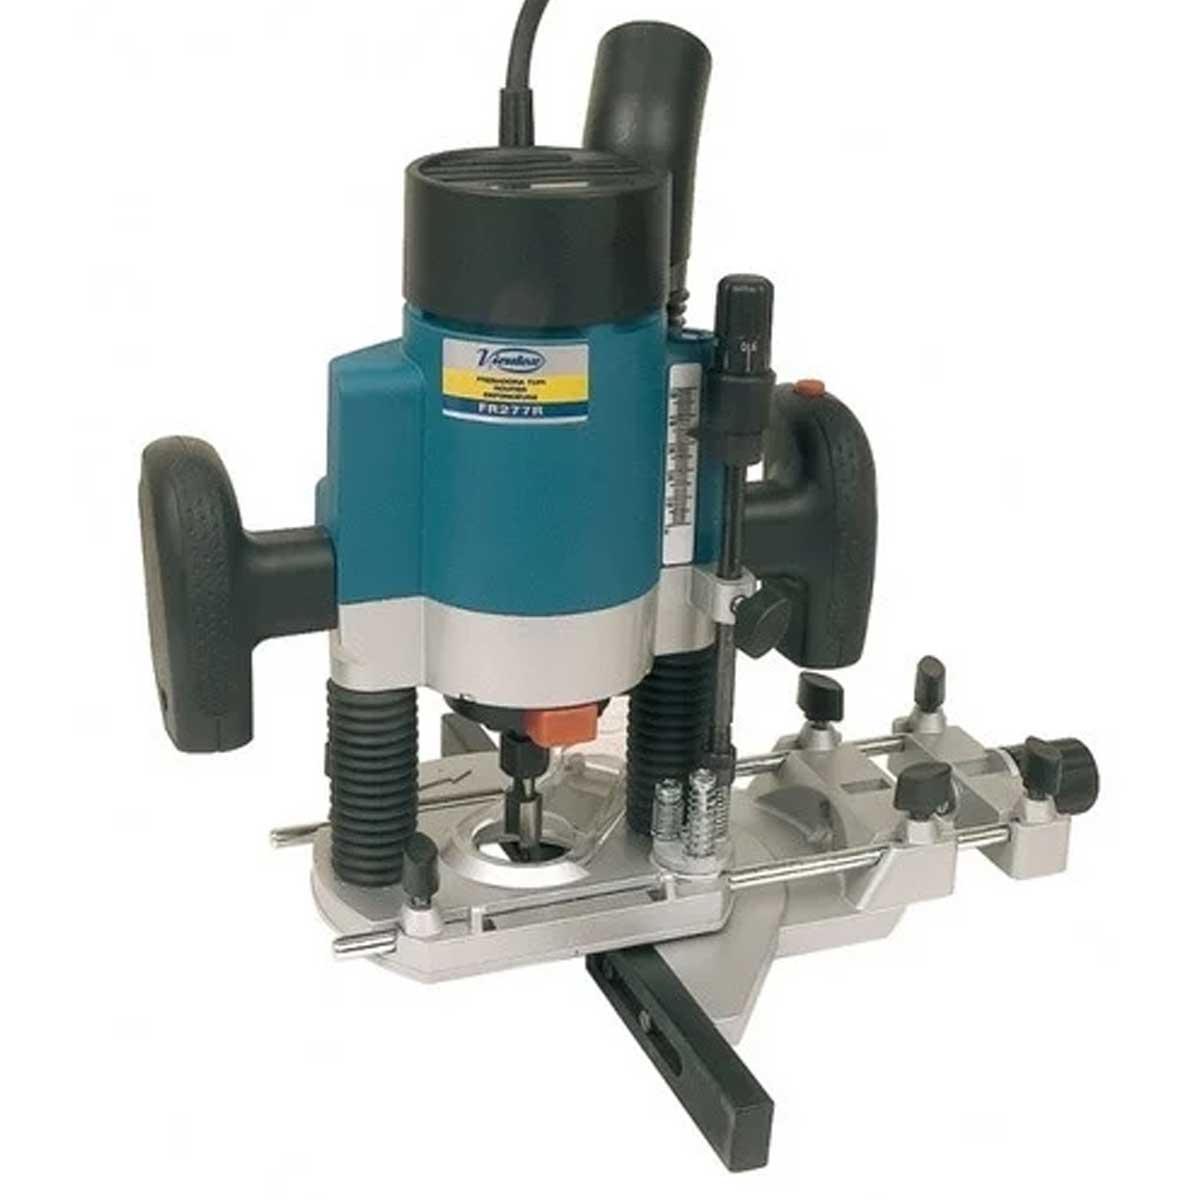 Surface Router Manufacturers, Suppliers in Chandigarh